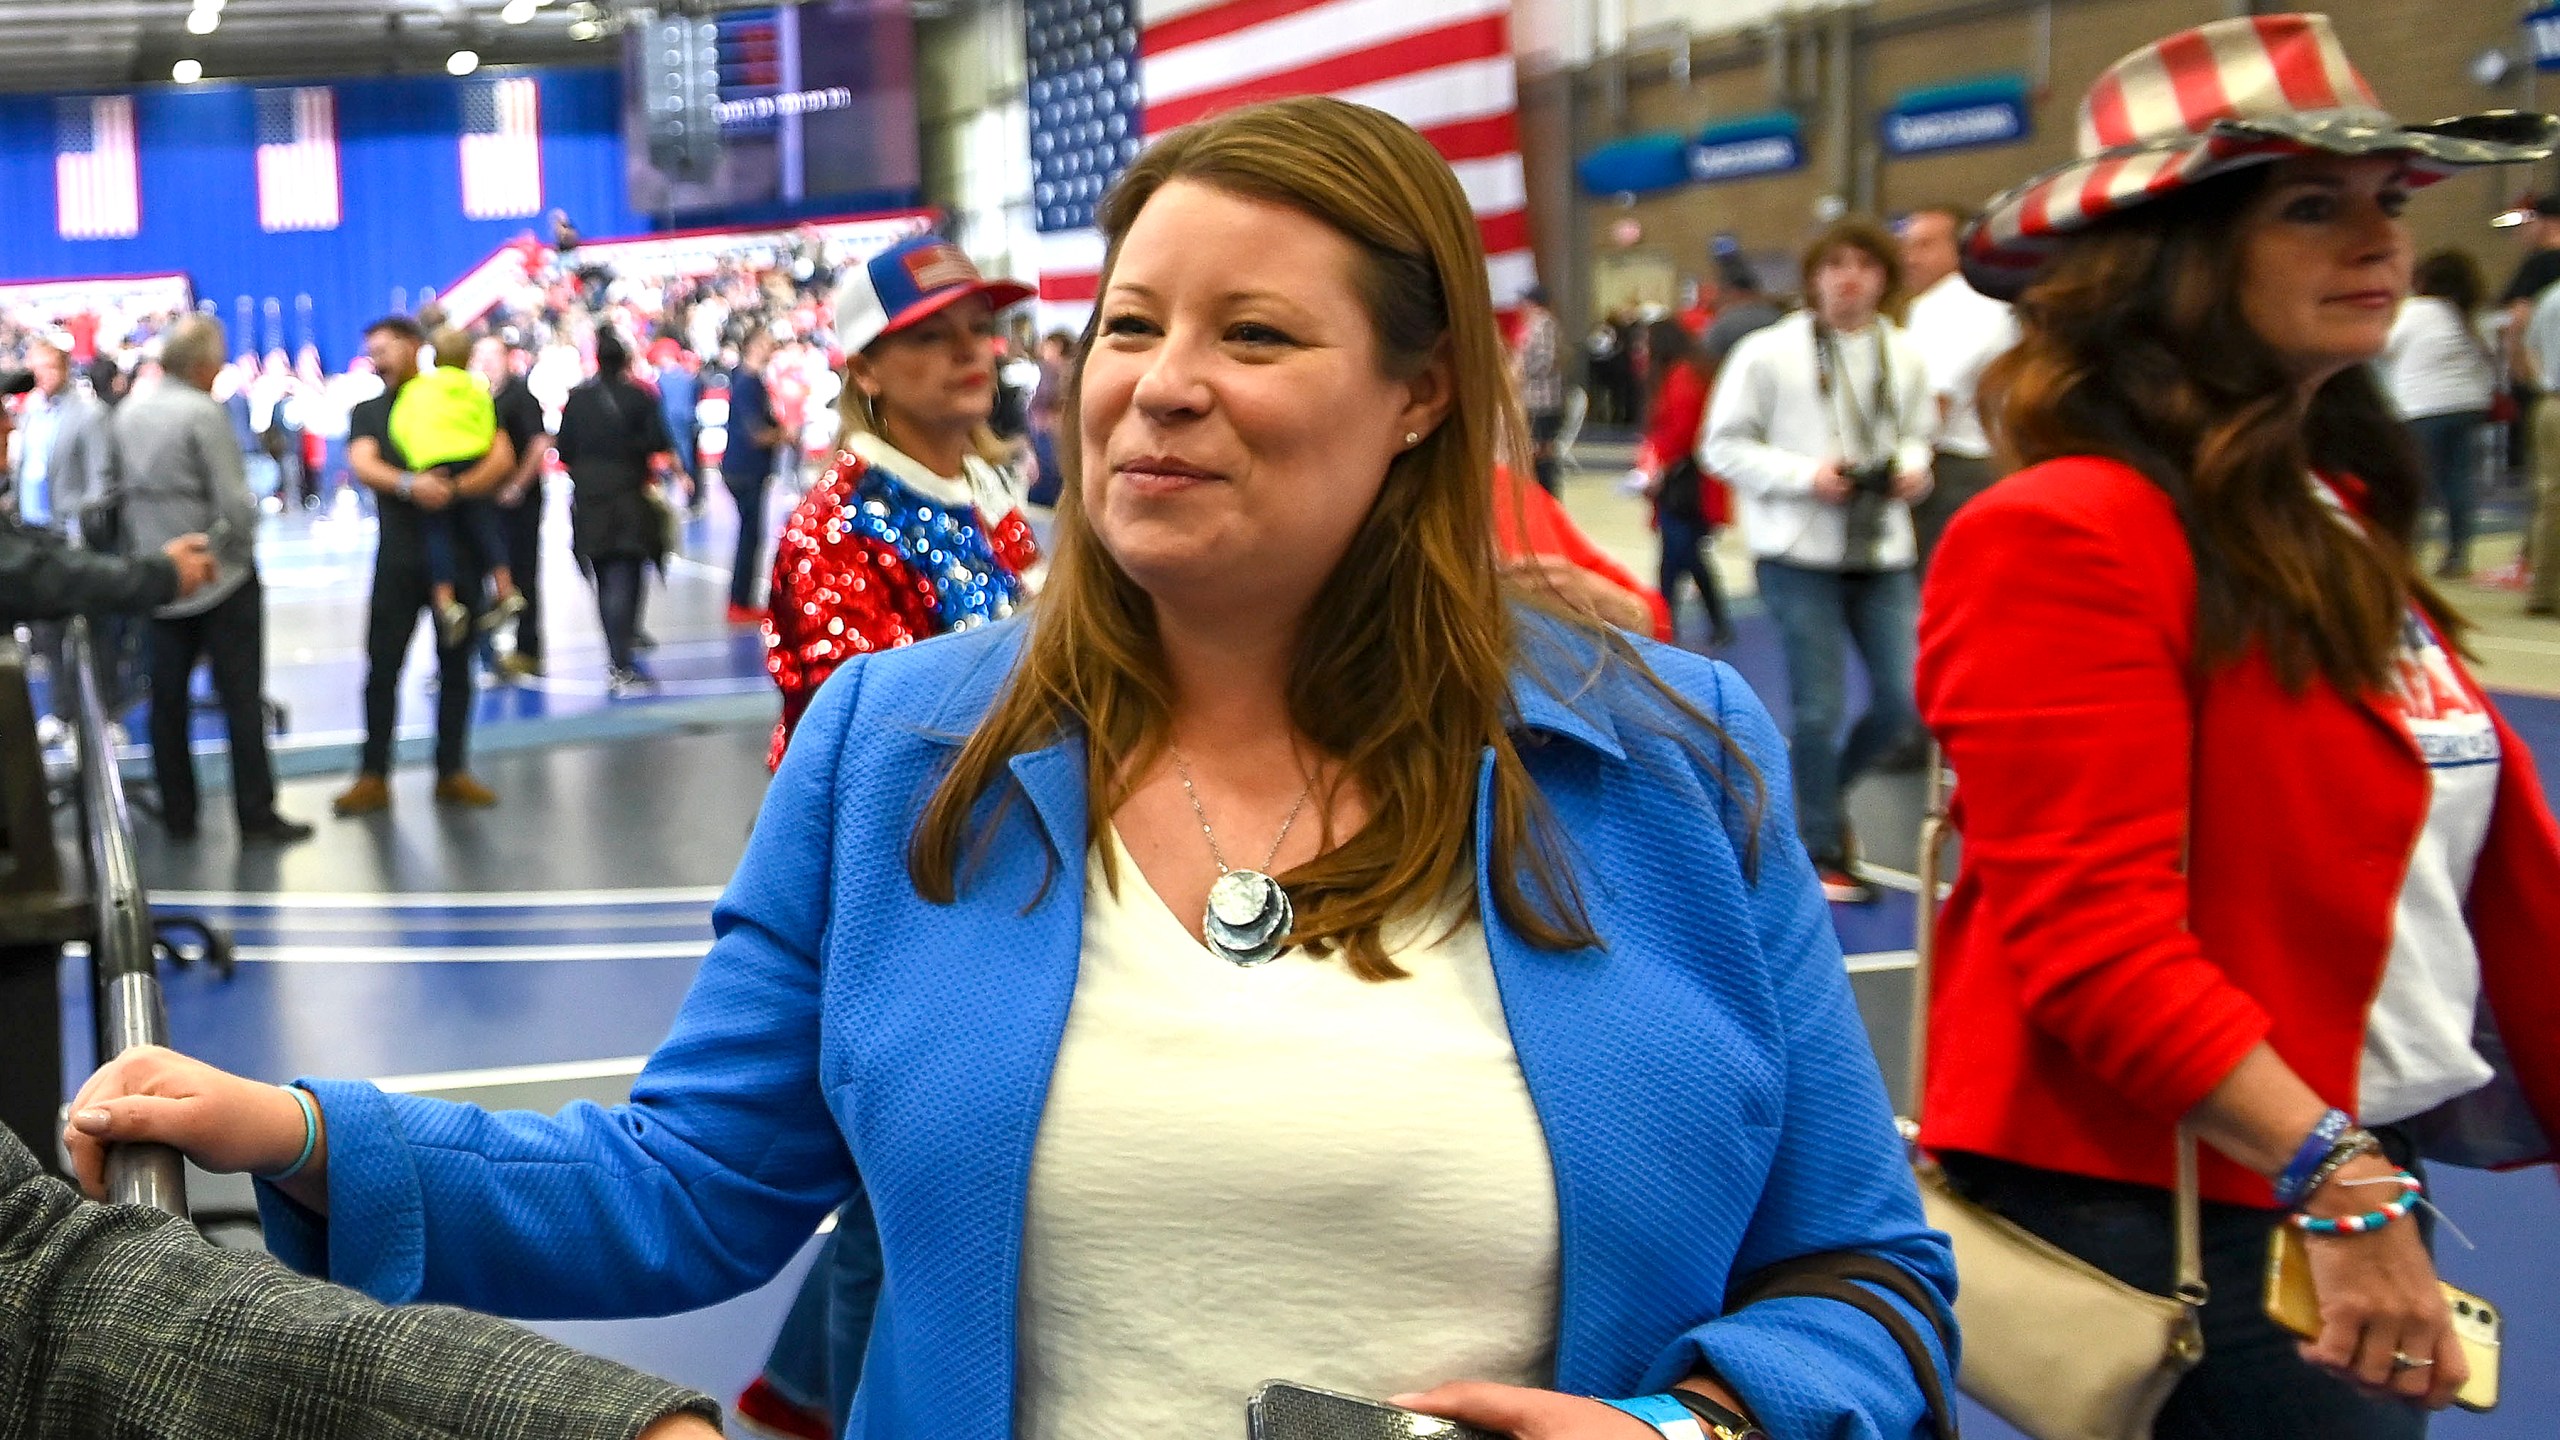 Stefanie Lambert attends a rally for Republican candidates at the Macomb Community College Sports & Expo Center in Warren, Mich., Oct. 1, 2022. The attorney facing criminal charges for illegally accessing Michigan voting machines after the 2020 election was arrested Monday, March 18, 2024 after a hearing in a separate case in federal court in Washington, D.C. (Todd McInturf/Detroit News via AP)